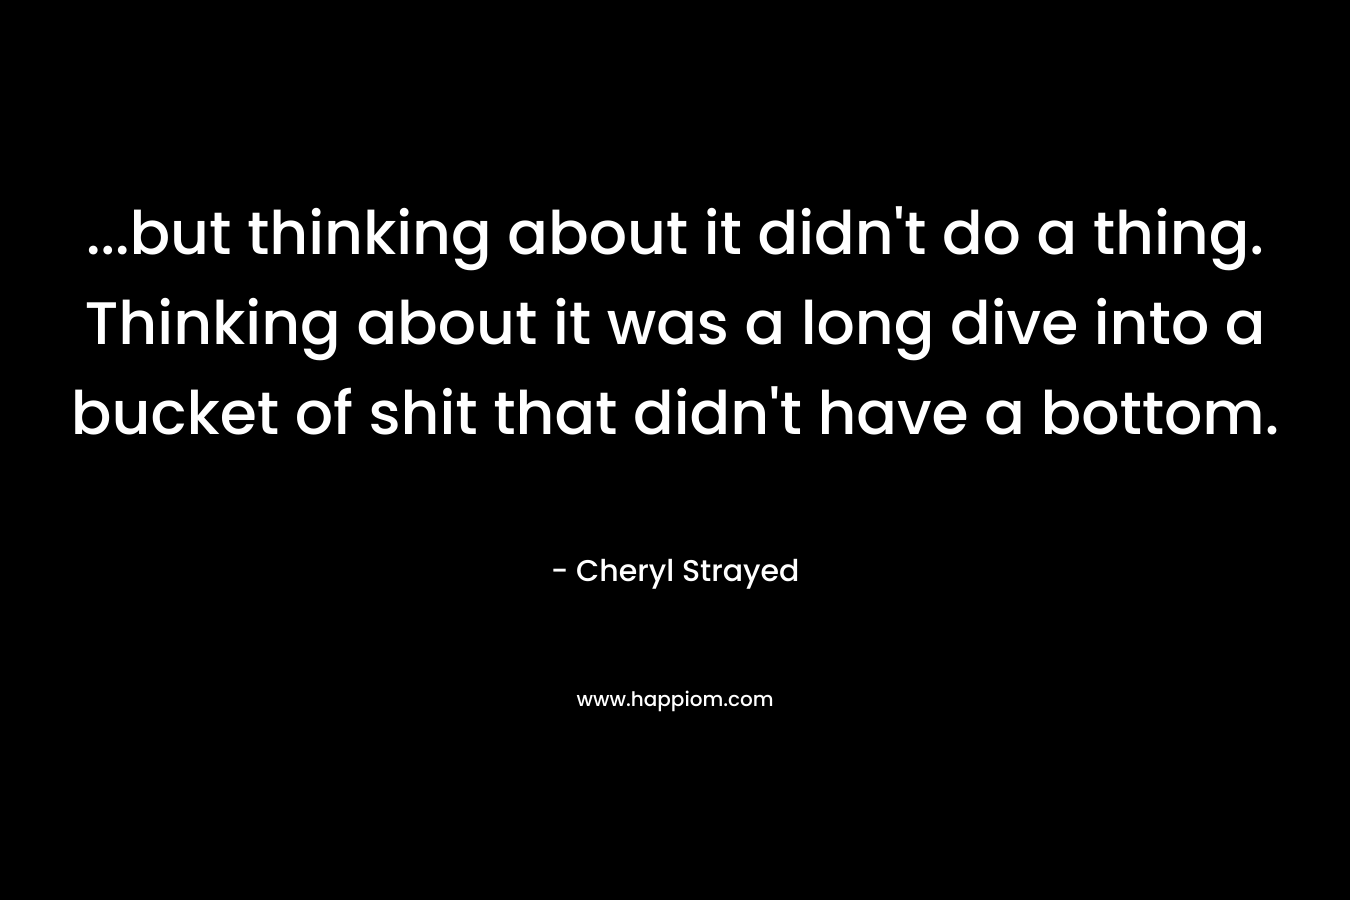 …but thinking about it didn’t do a thing. Thinking about it was a long dive into a bucket of shit that didn’t have a bottom. – Cheryl Strayed